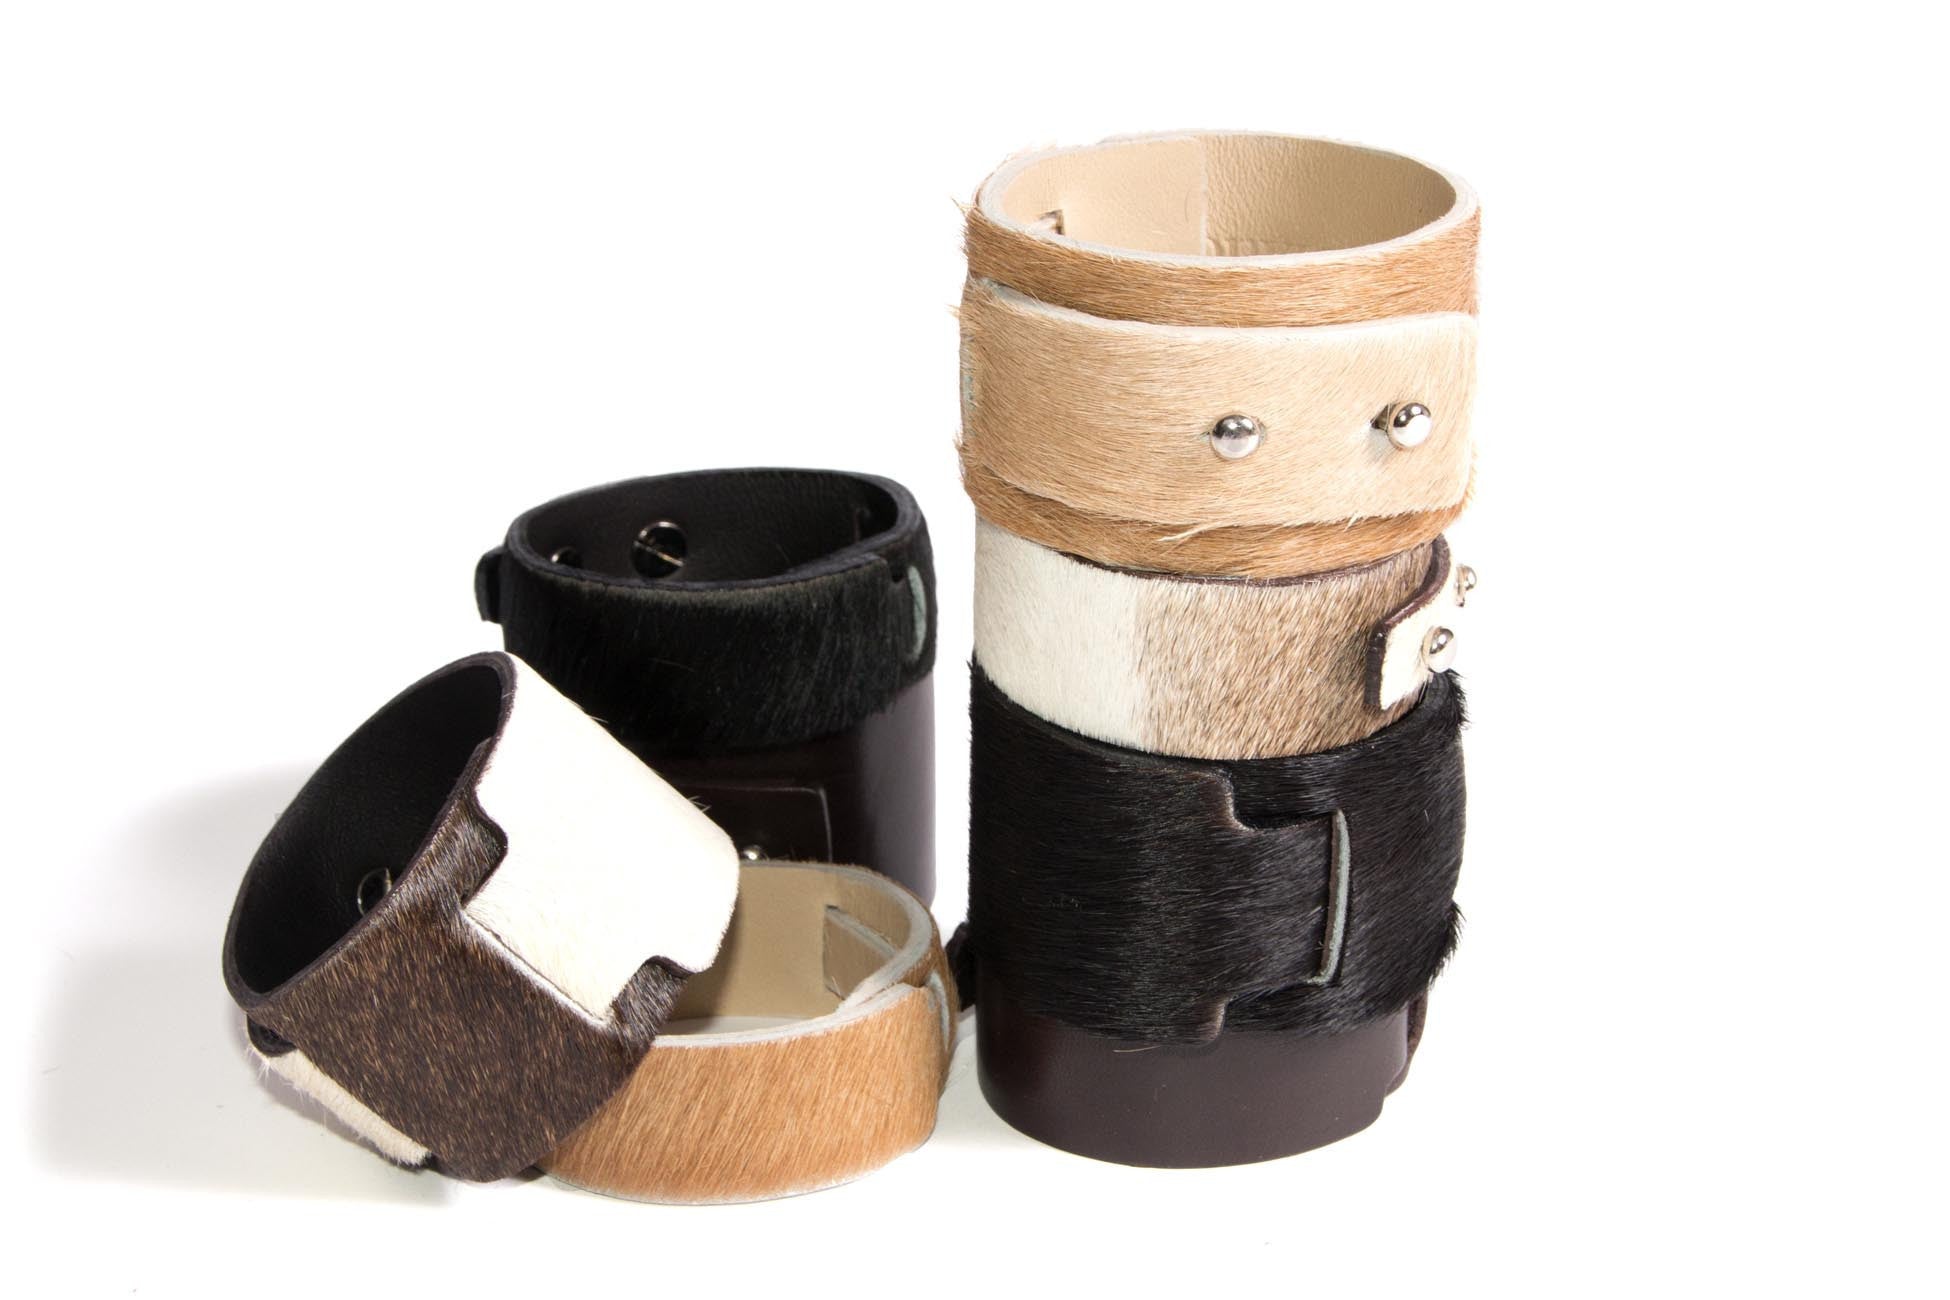 Little Bess Cuff Brown Leather